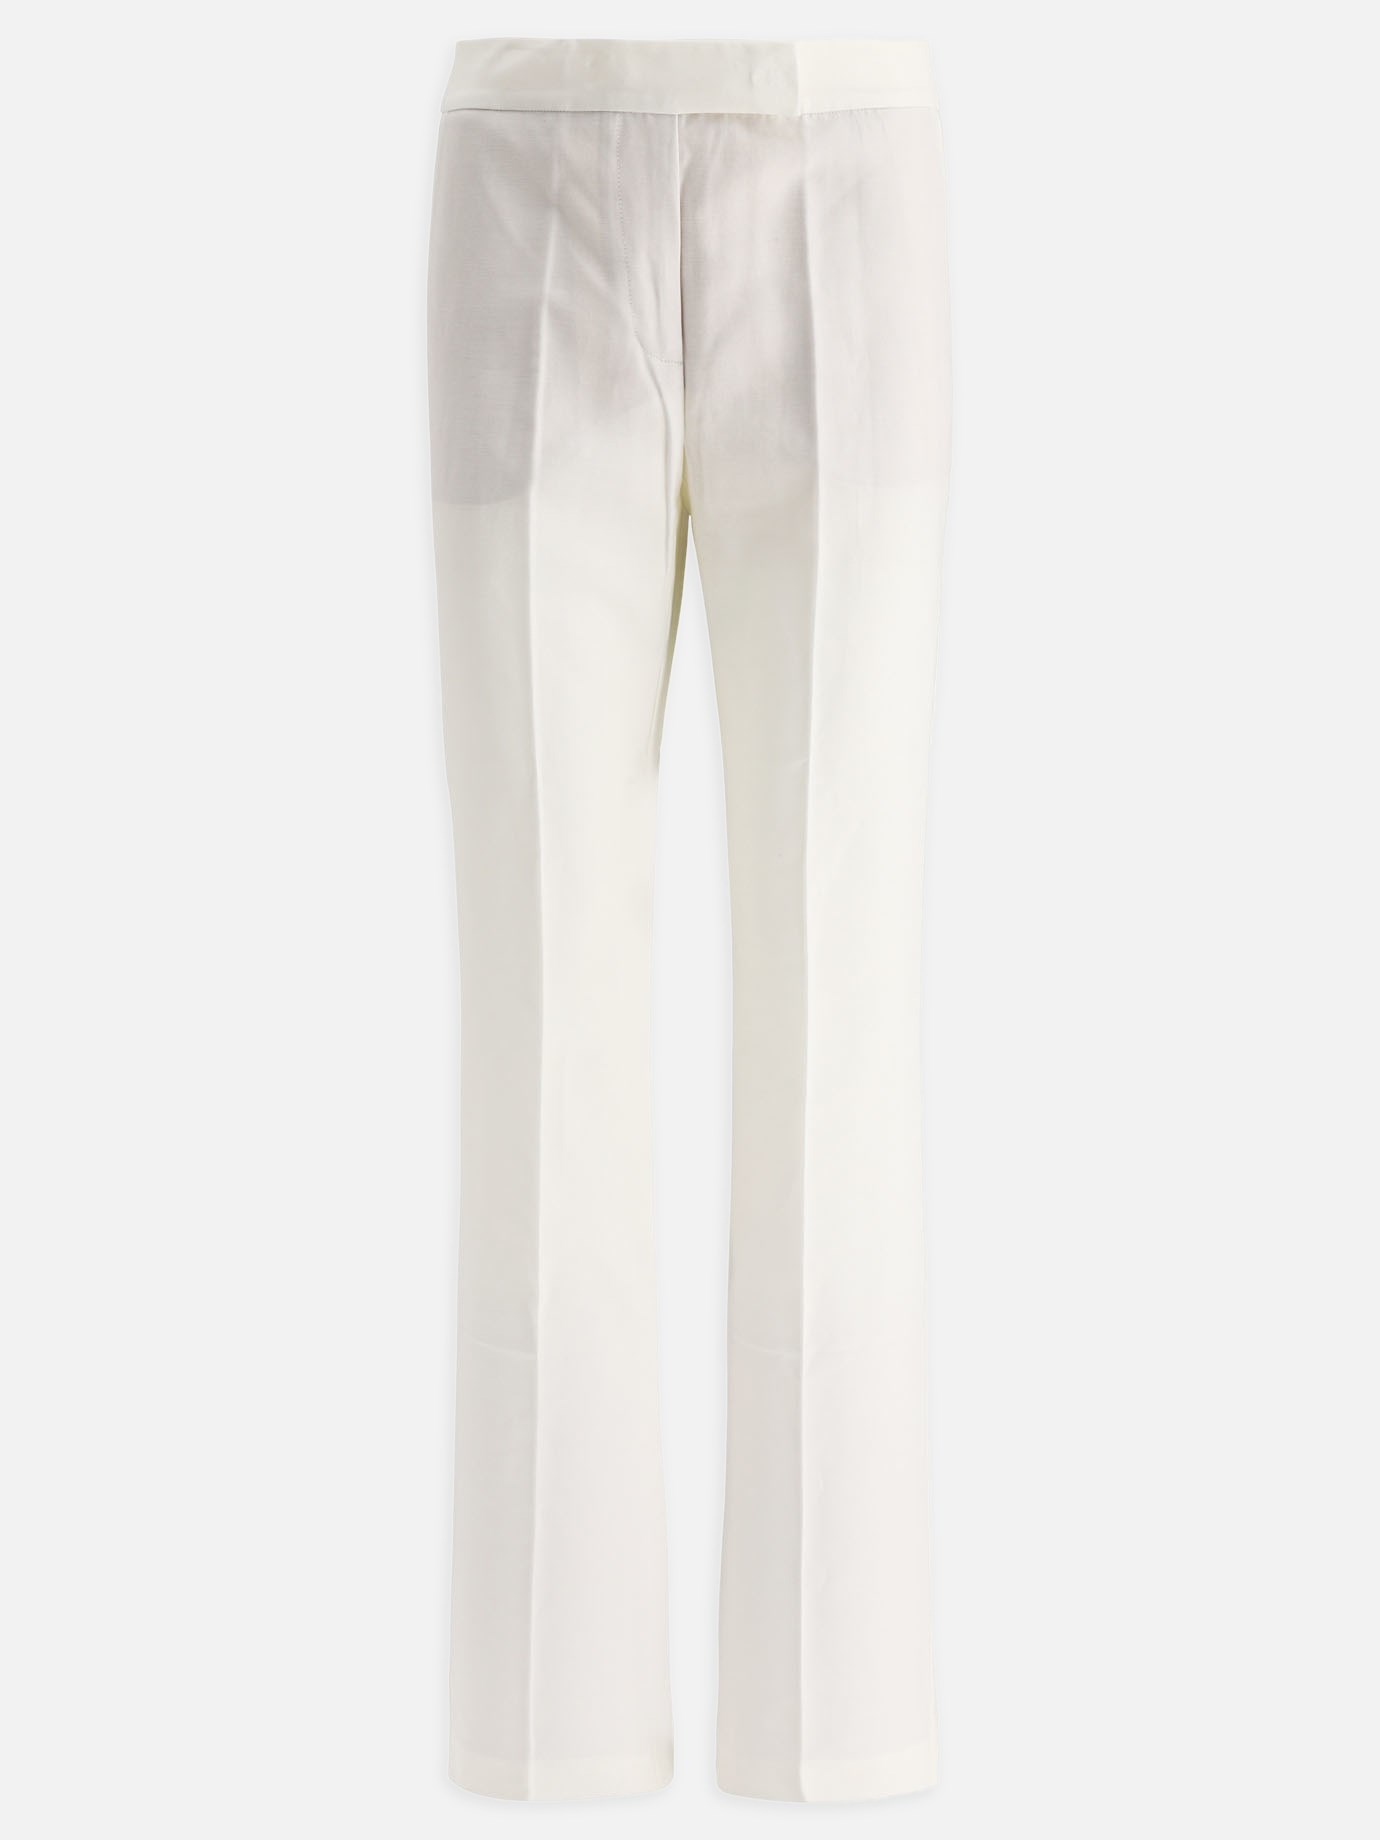  Gladys  trousers by The Andamane